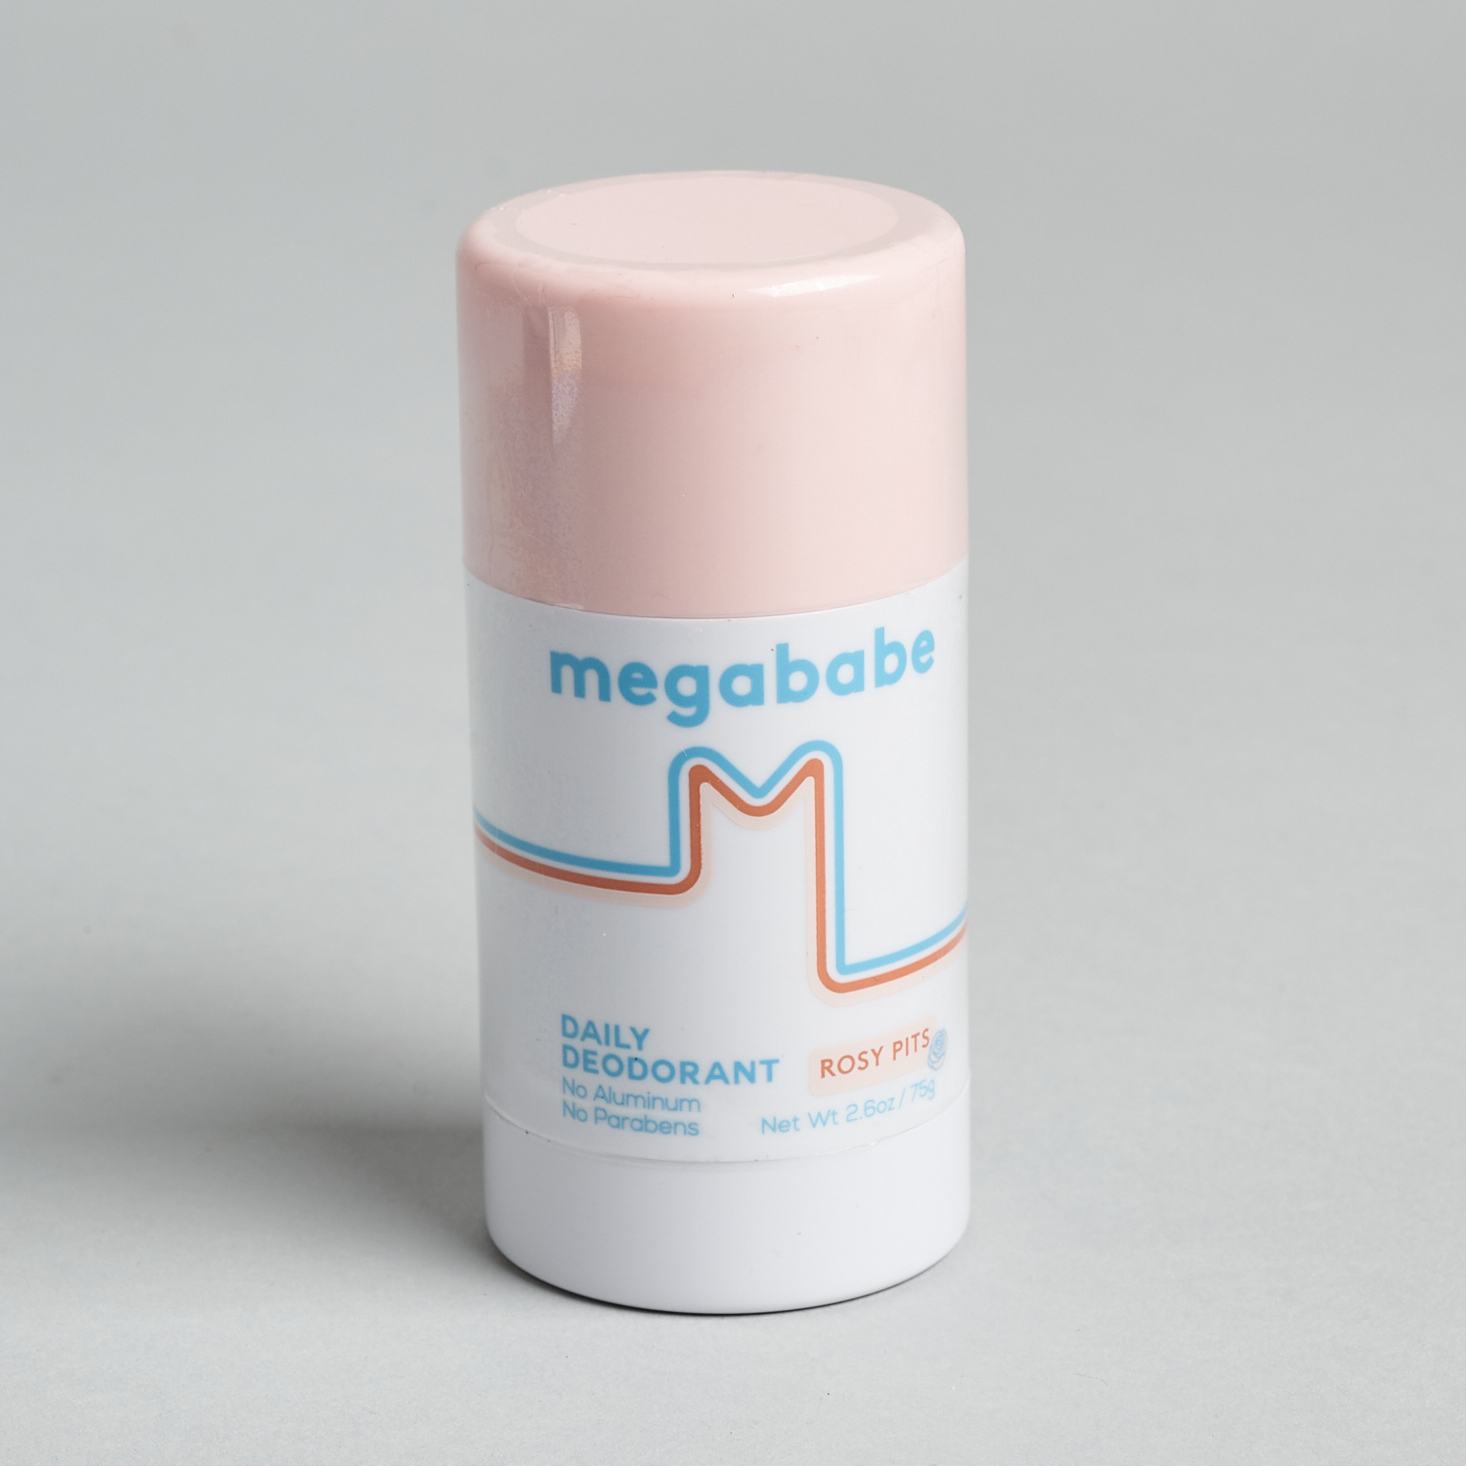 My Megababe Deodorant Review – I Tried Rosy Pits and Felt Amazing